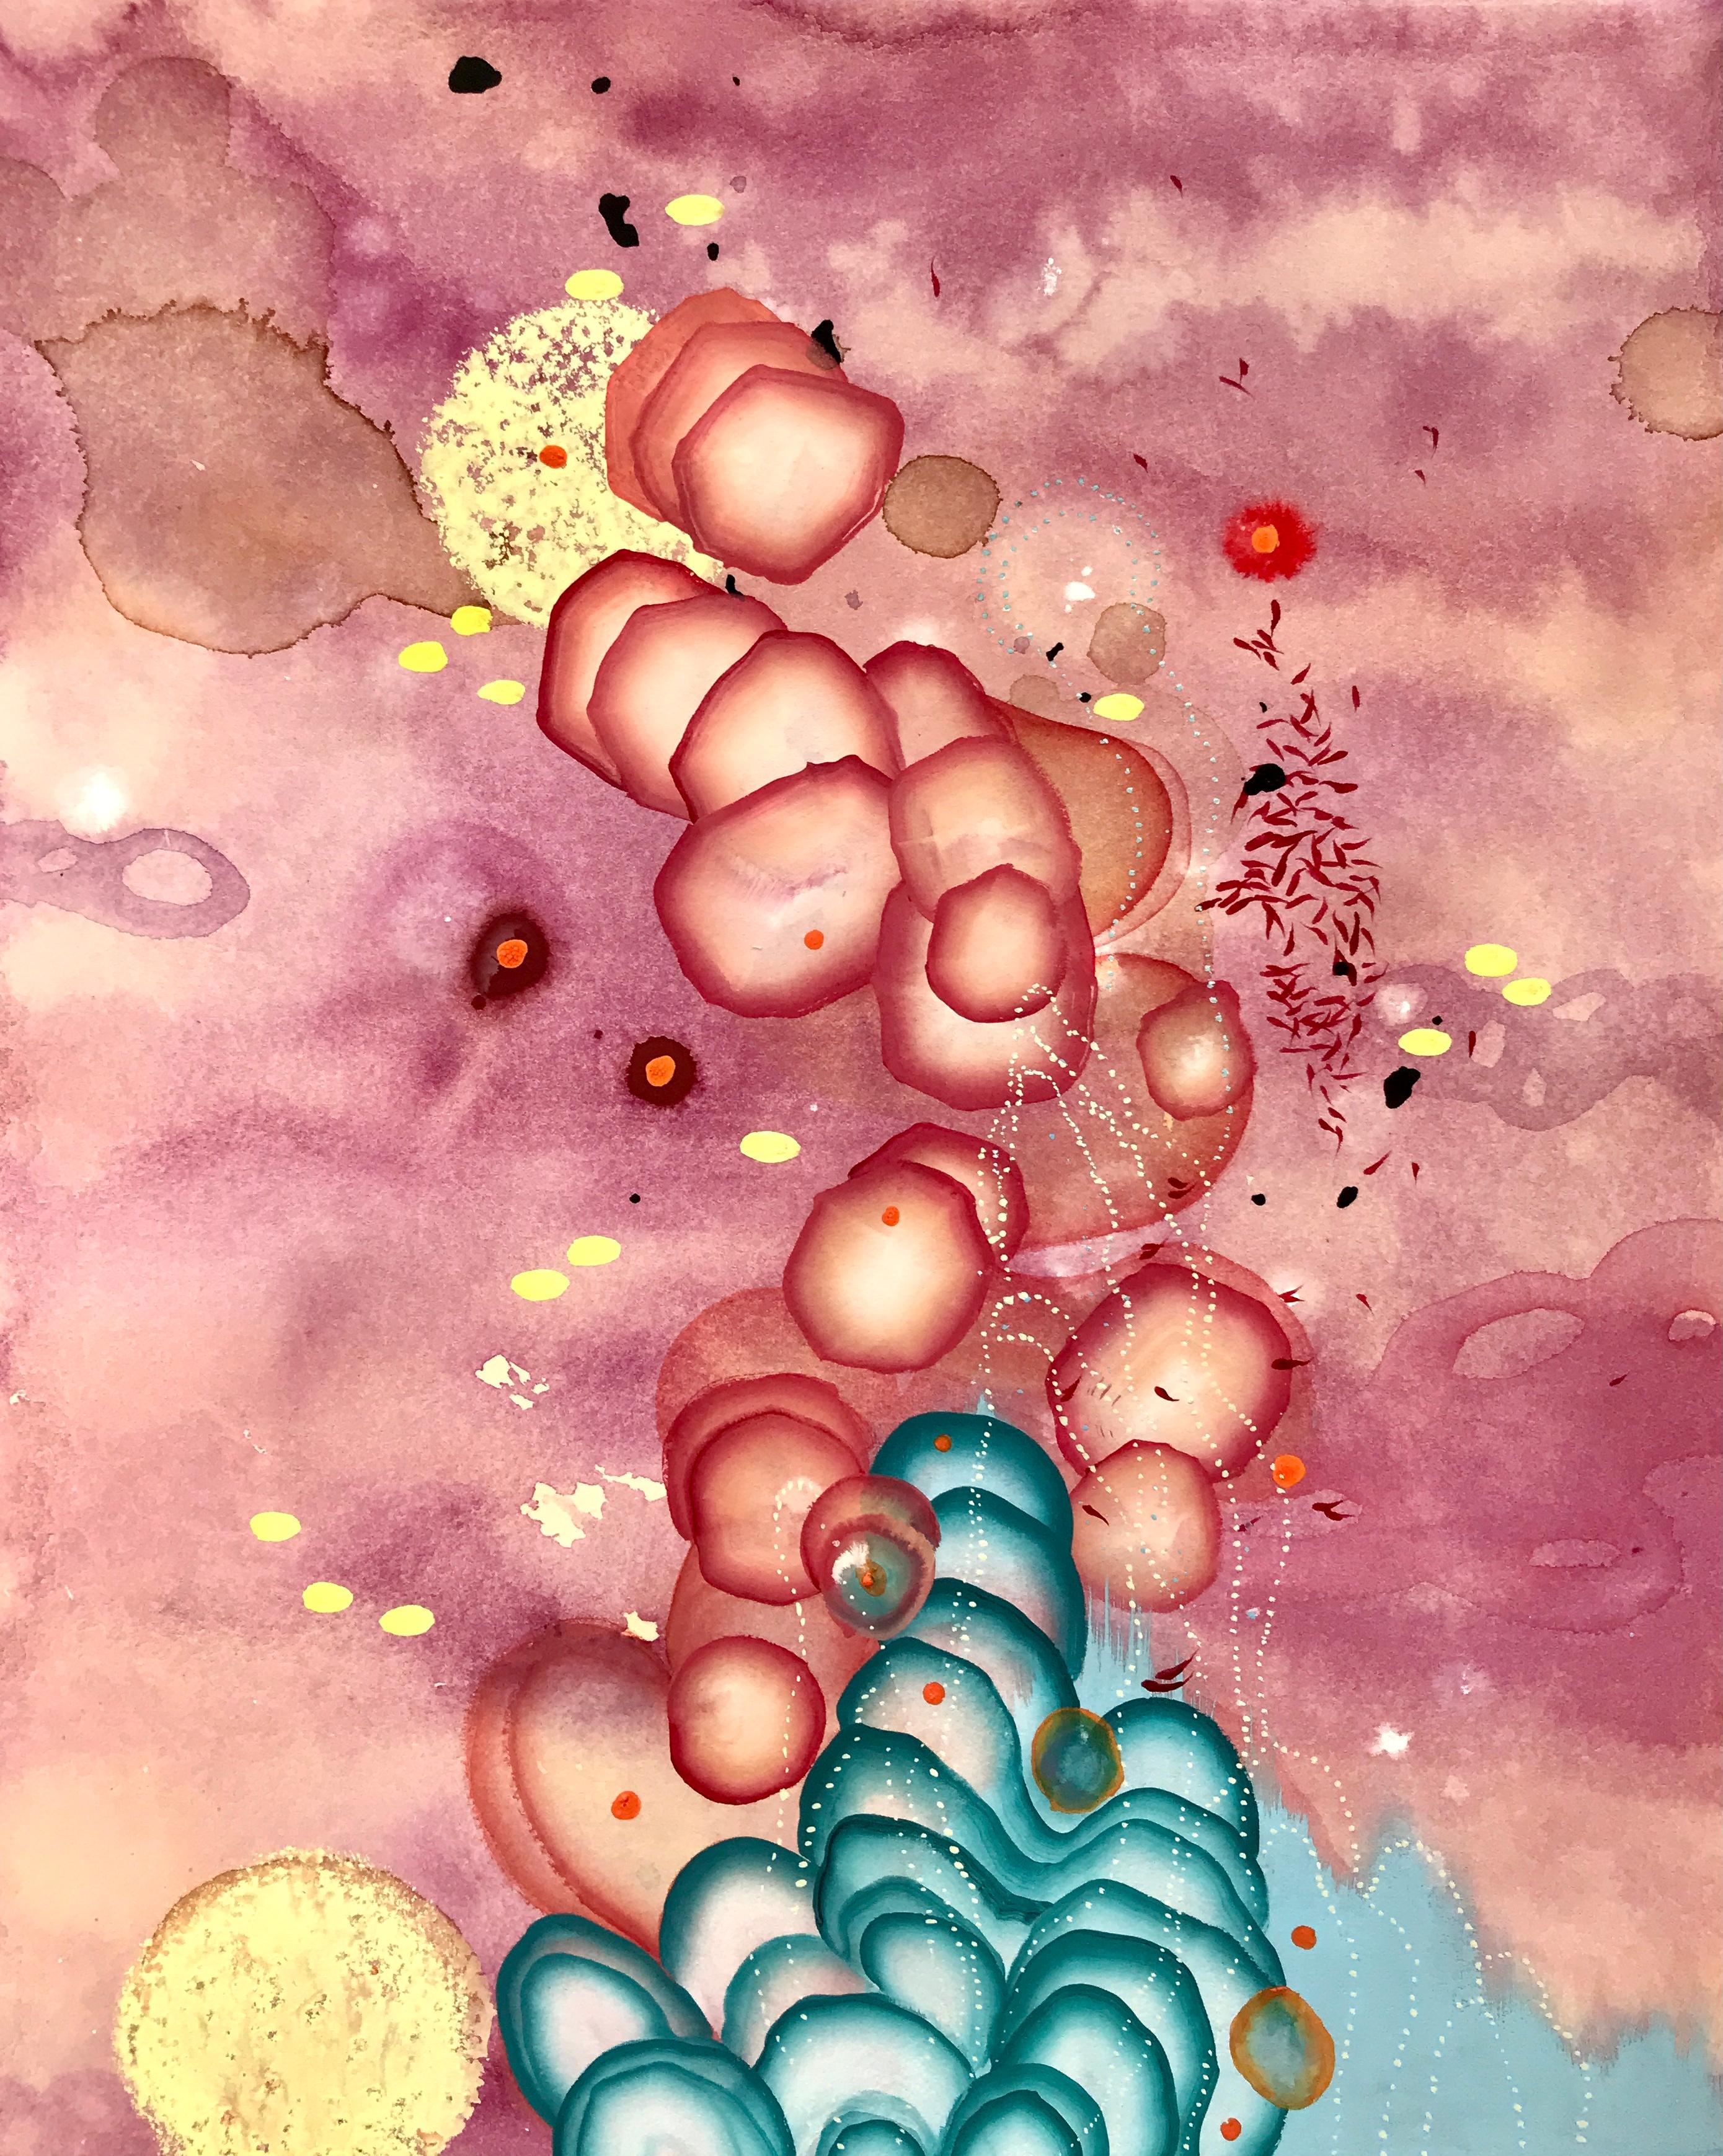 Nucleation Study is a contemporary abstract painting made with watercolor and gouache on paper, and was painted by emerging artist from Houston, Texas, Grayson Chandler. Painted in 2021, this artwork measures 16 x 13.5 inches. Highly abstract with